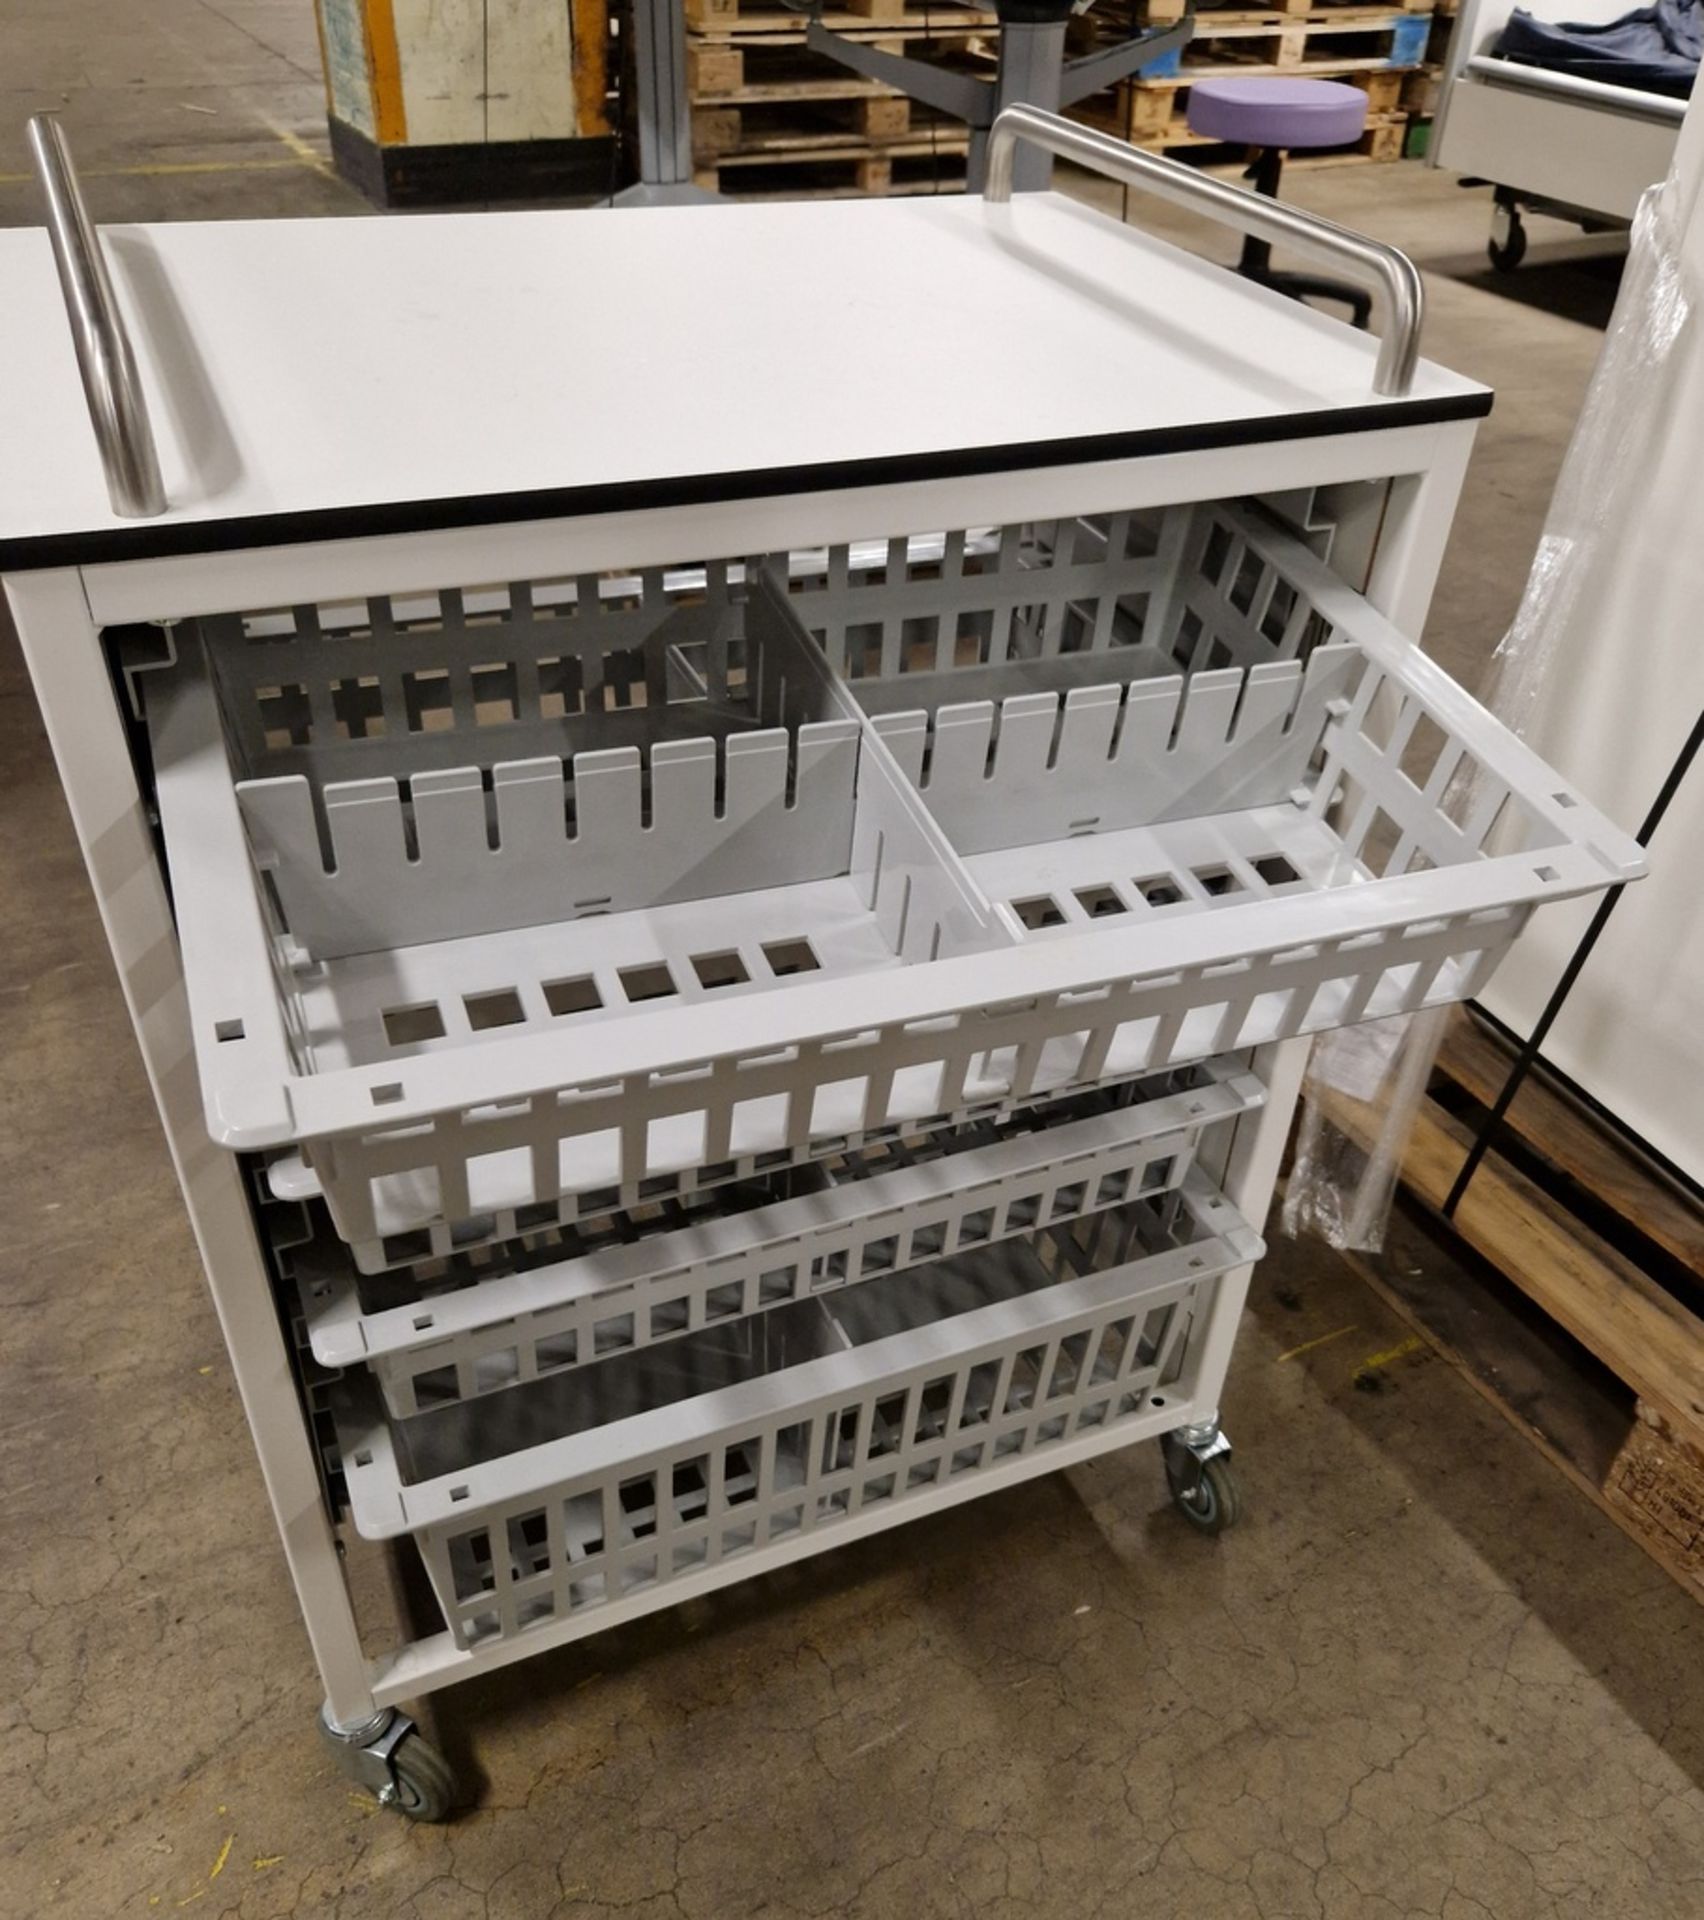 16x dispensing 4 drawer trolley crates 67x48x89cm (LxWxH) - Image 2 of 4